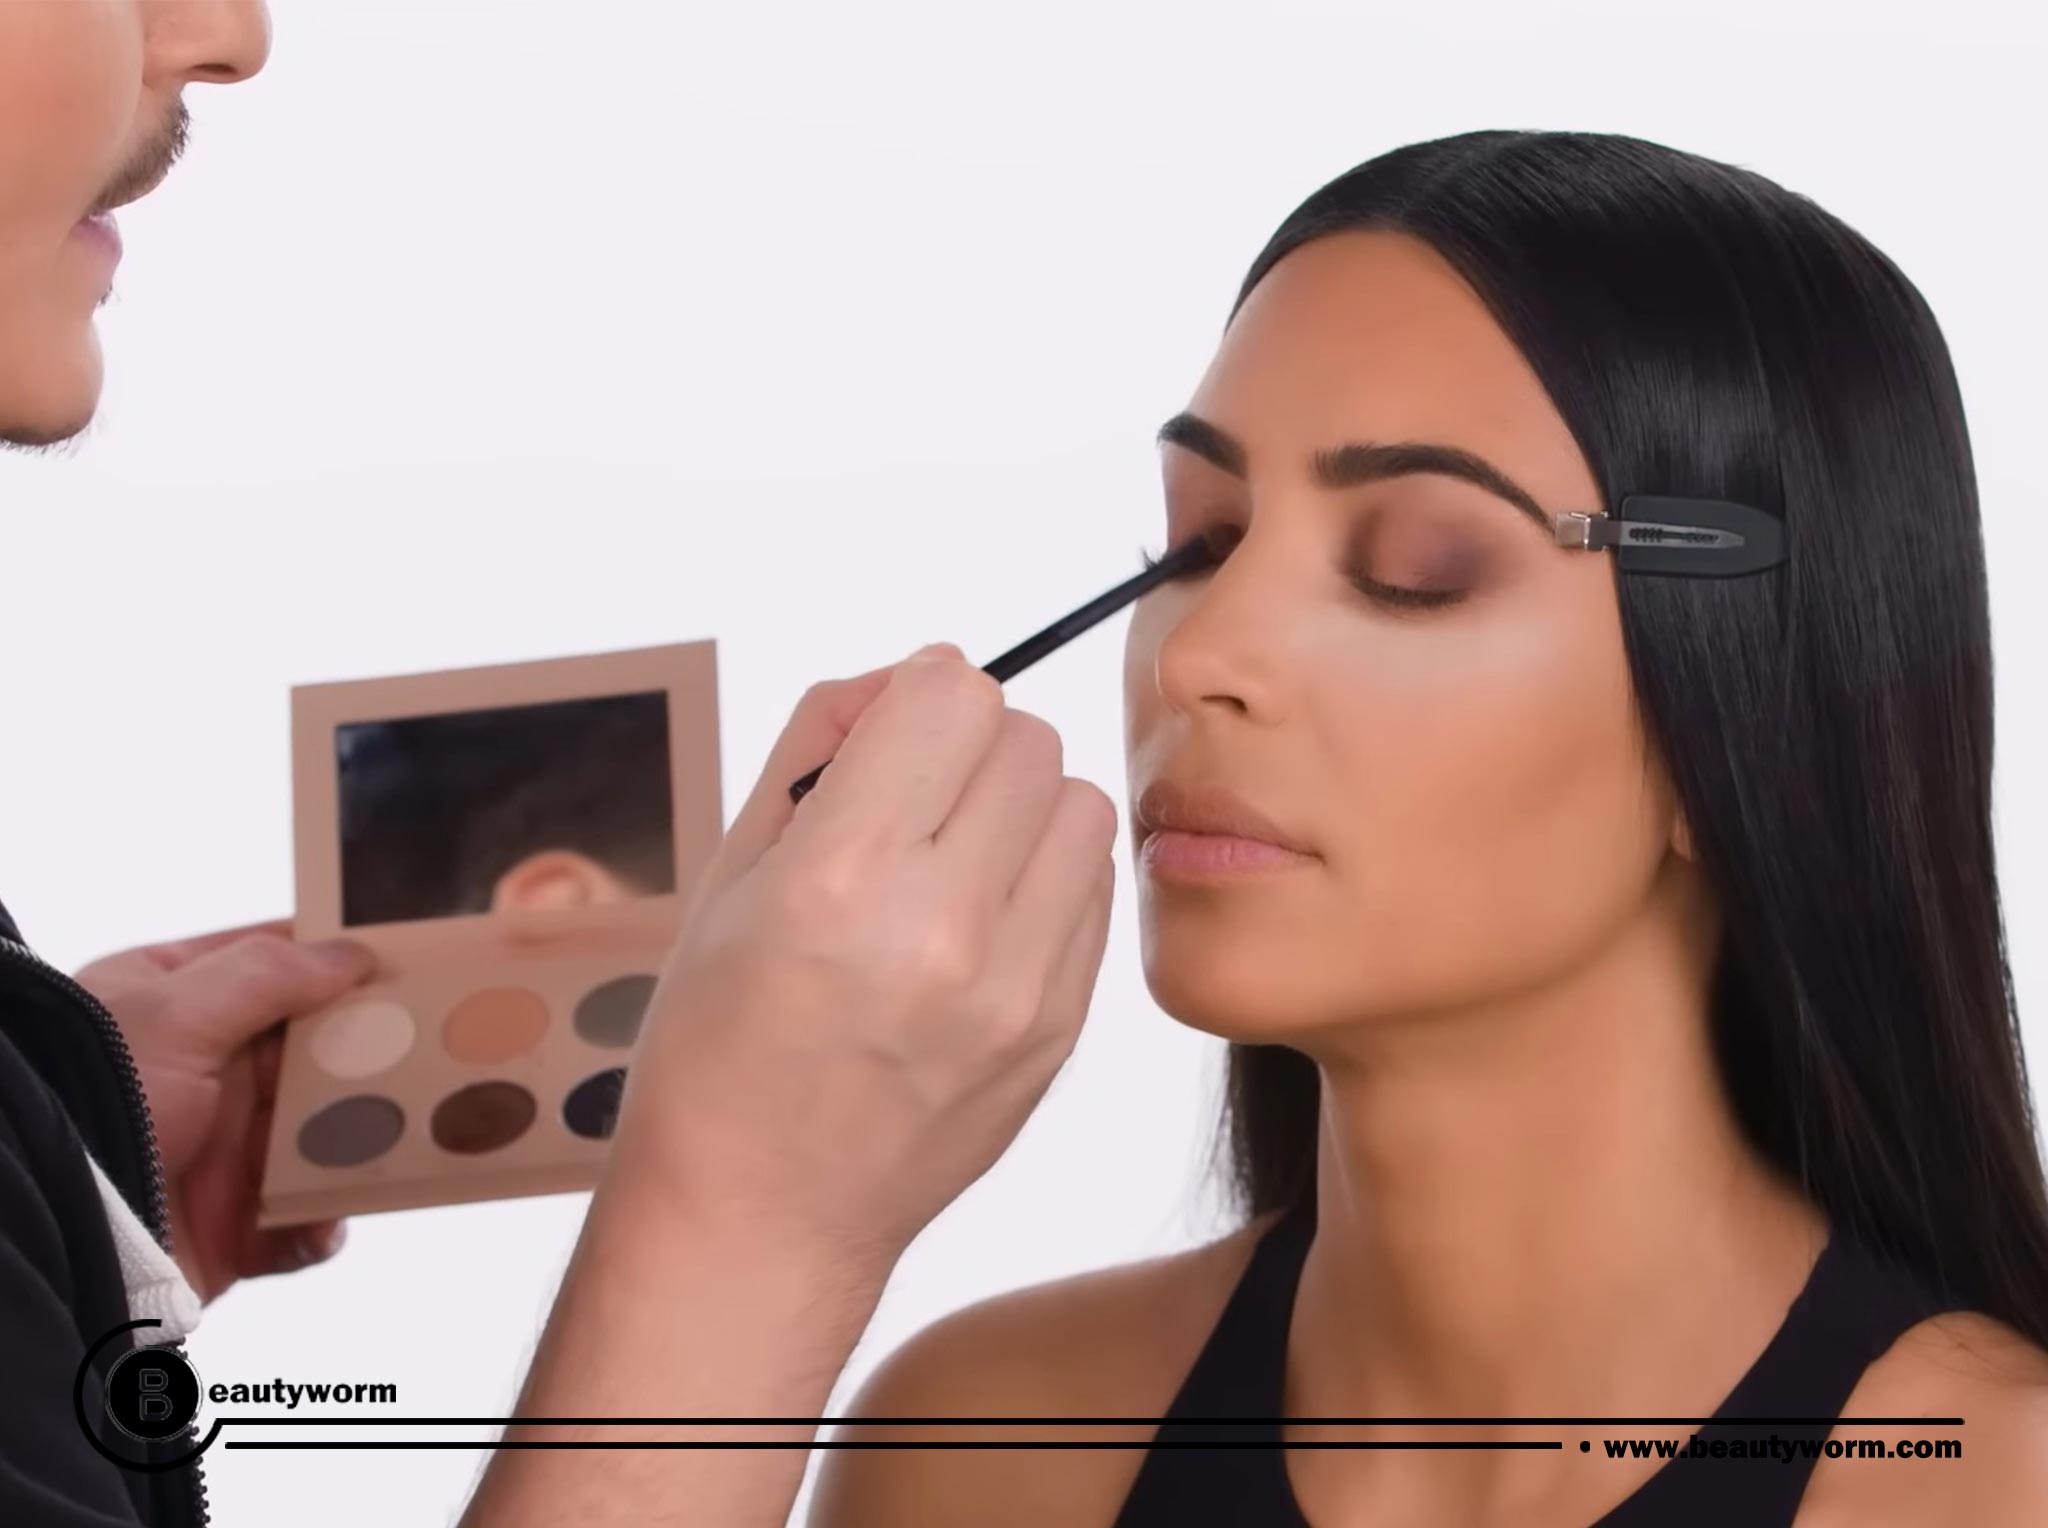 Blending is essential for creating a smooth, seamless smokey eye. Start by applying a light base color to the entire eyelid.